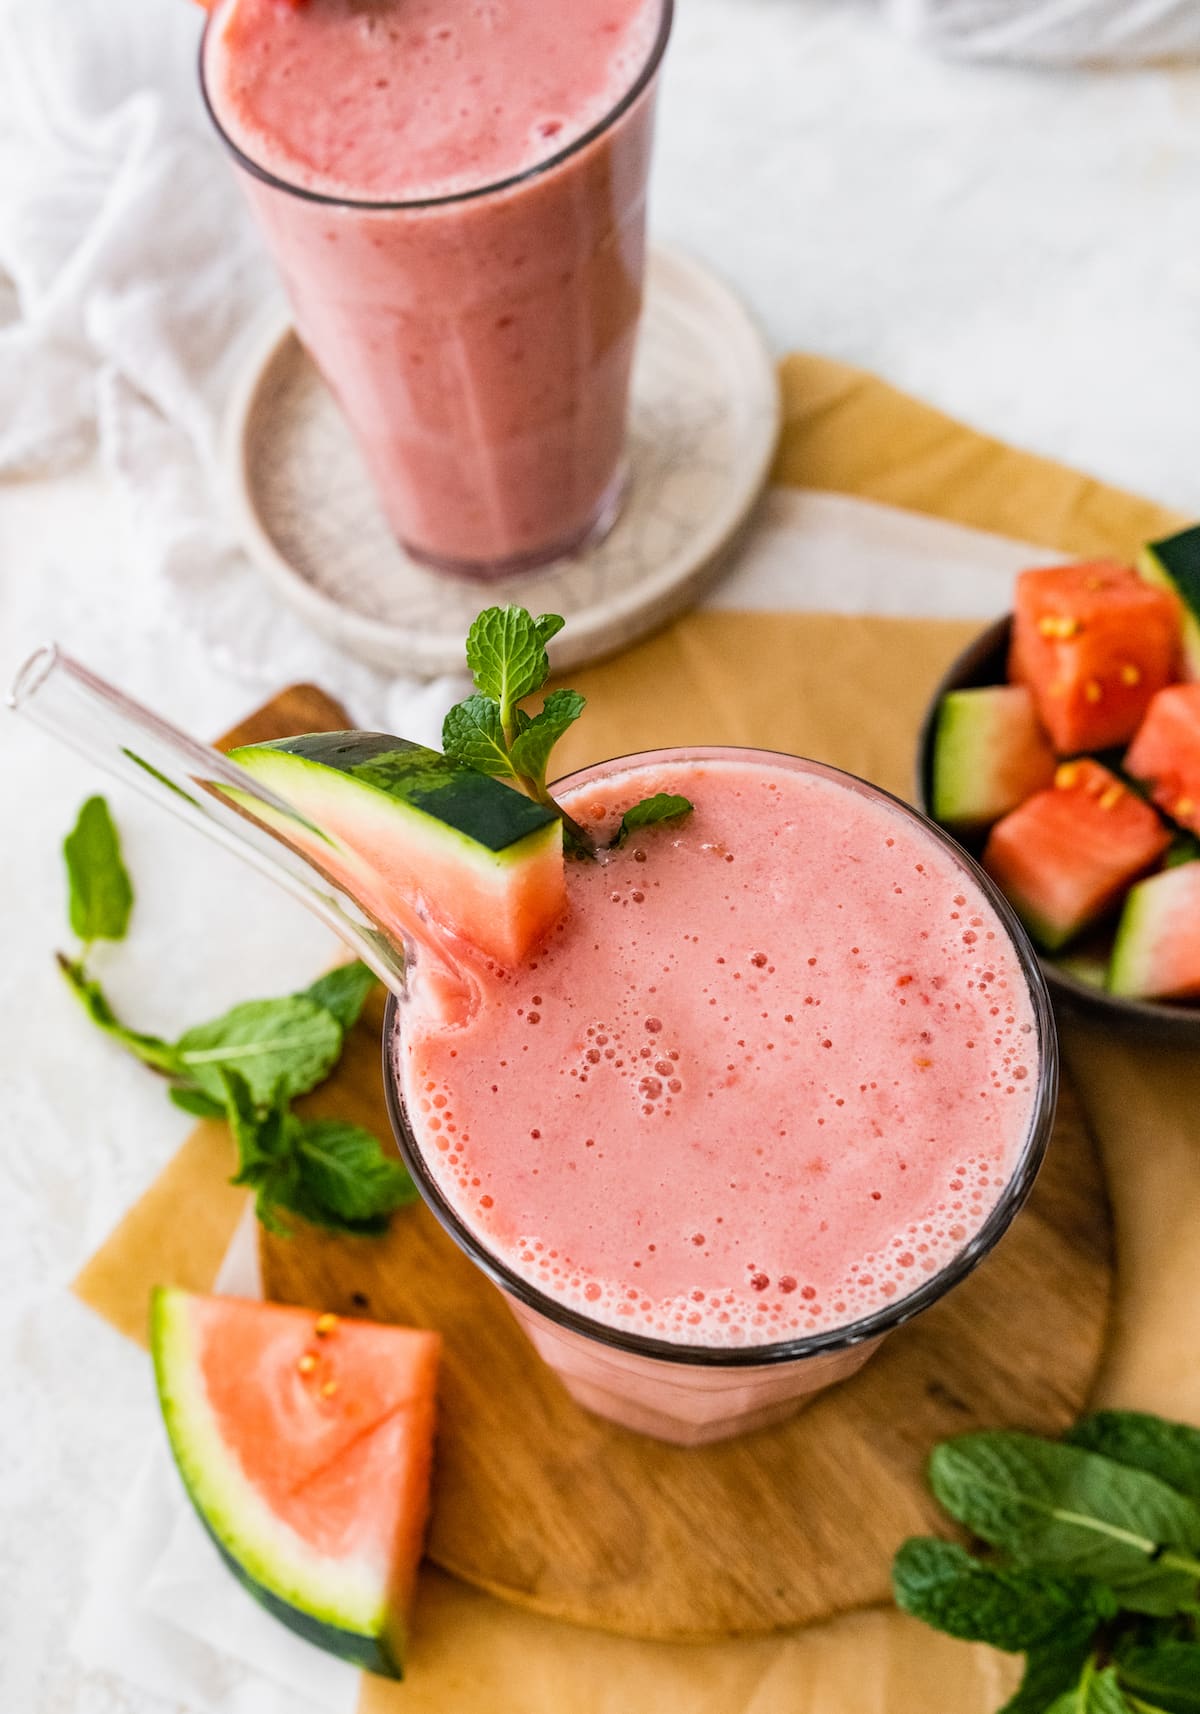 Watermelon smoothie with straw and fresh watermelon slice.